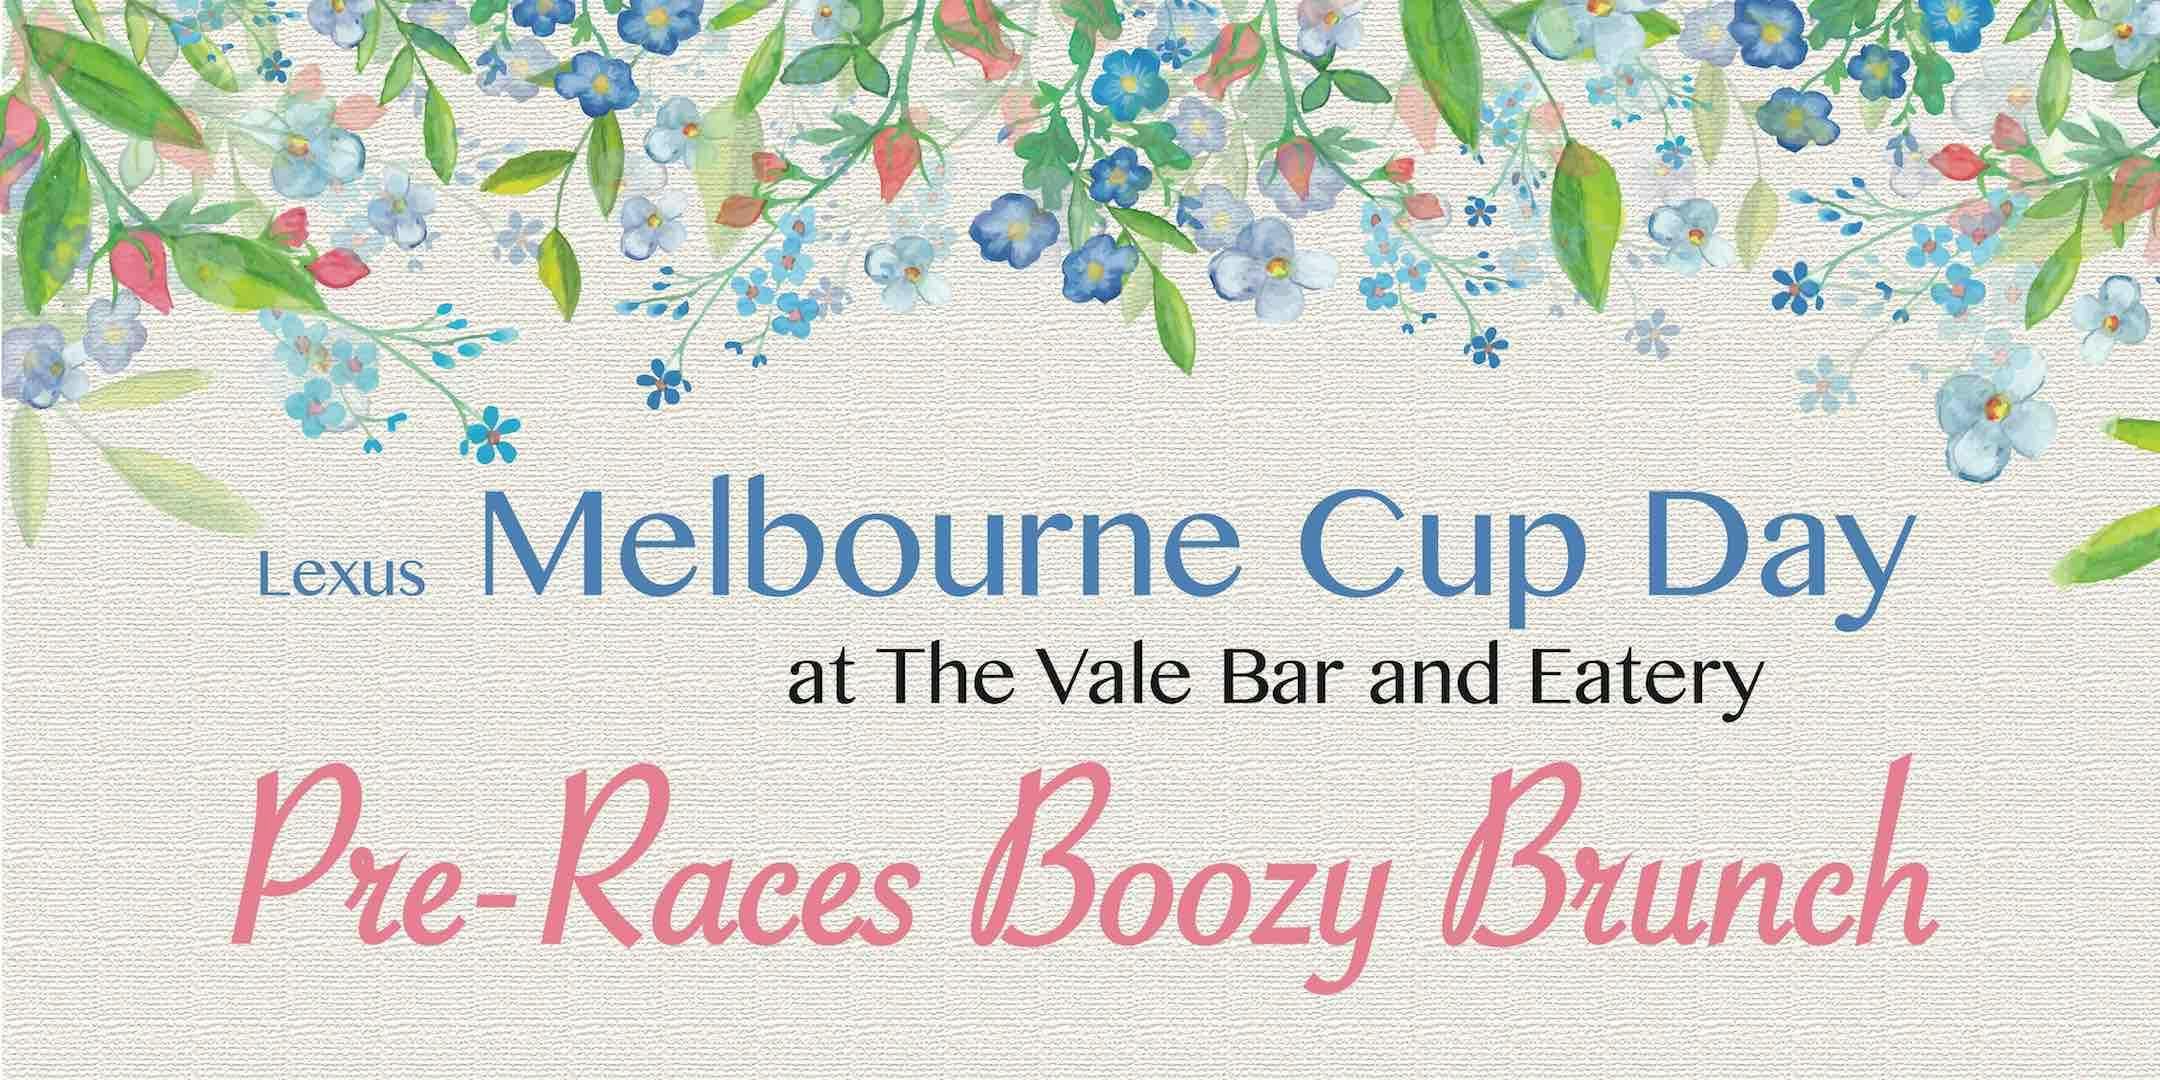 Melbourne Cup - Pre Races Boozy Brunch @ The Vale Bar and Eatery